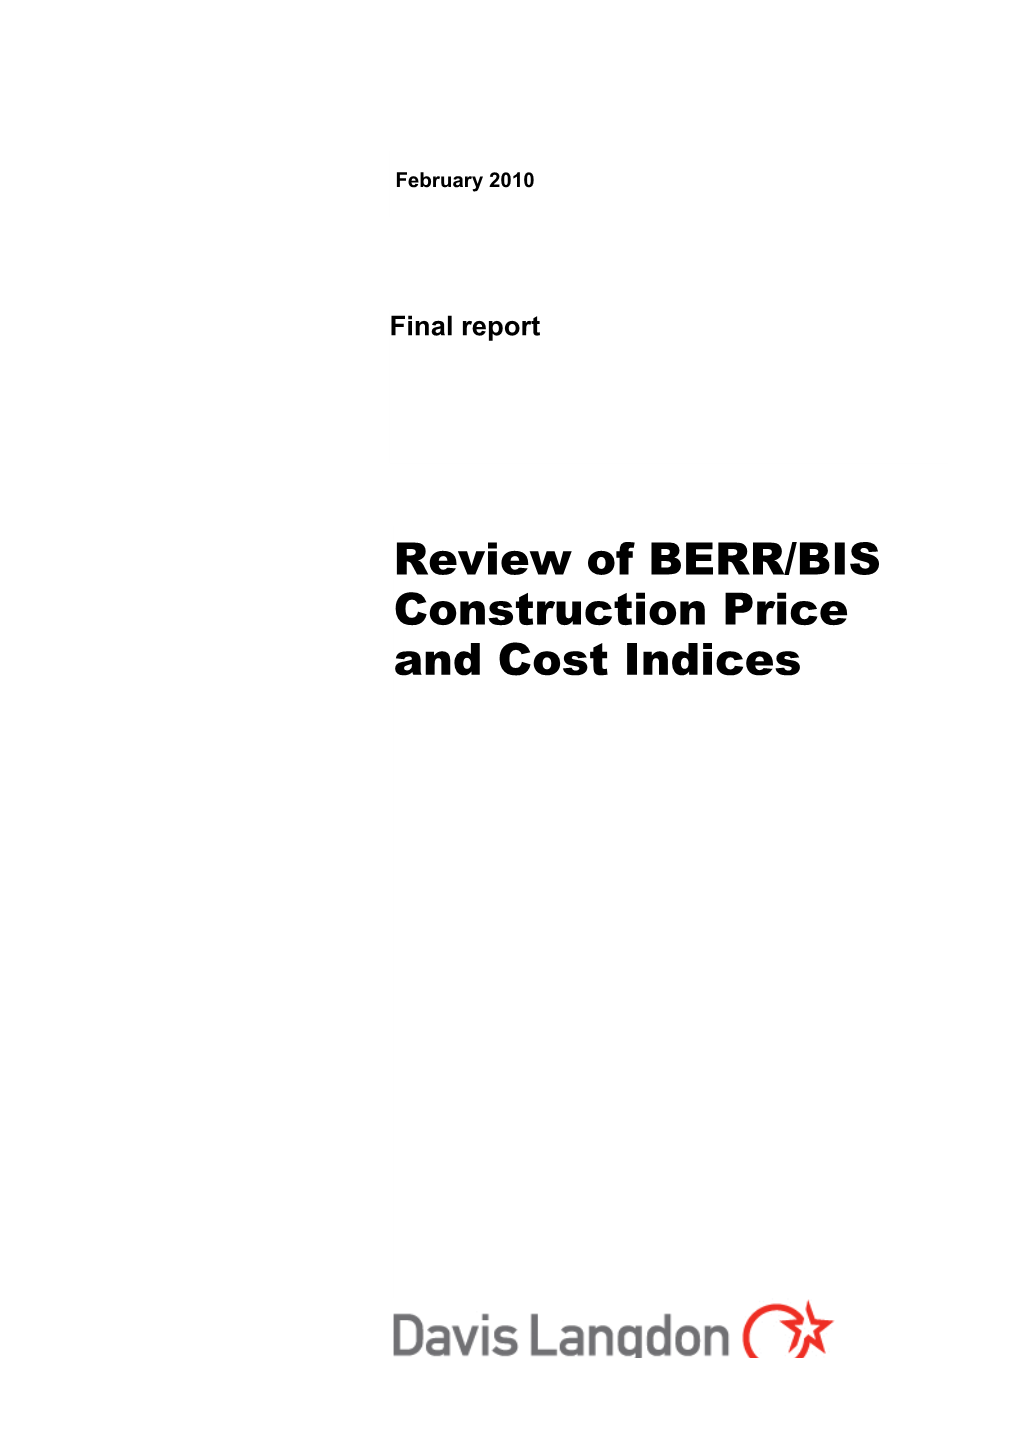 Review of BERR/BIS Construction Price and Cost Indices